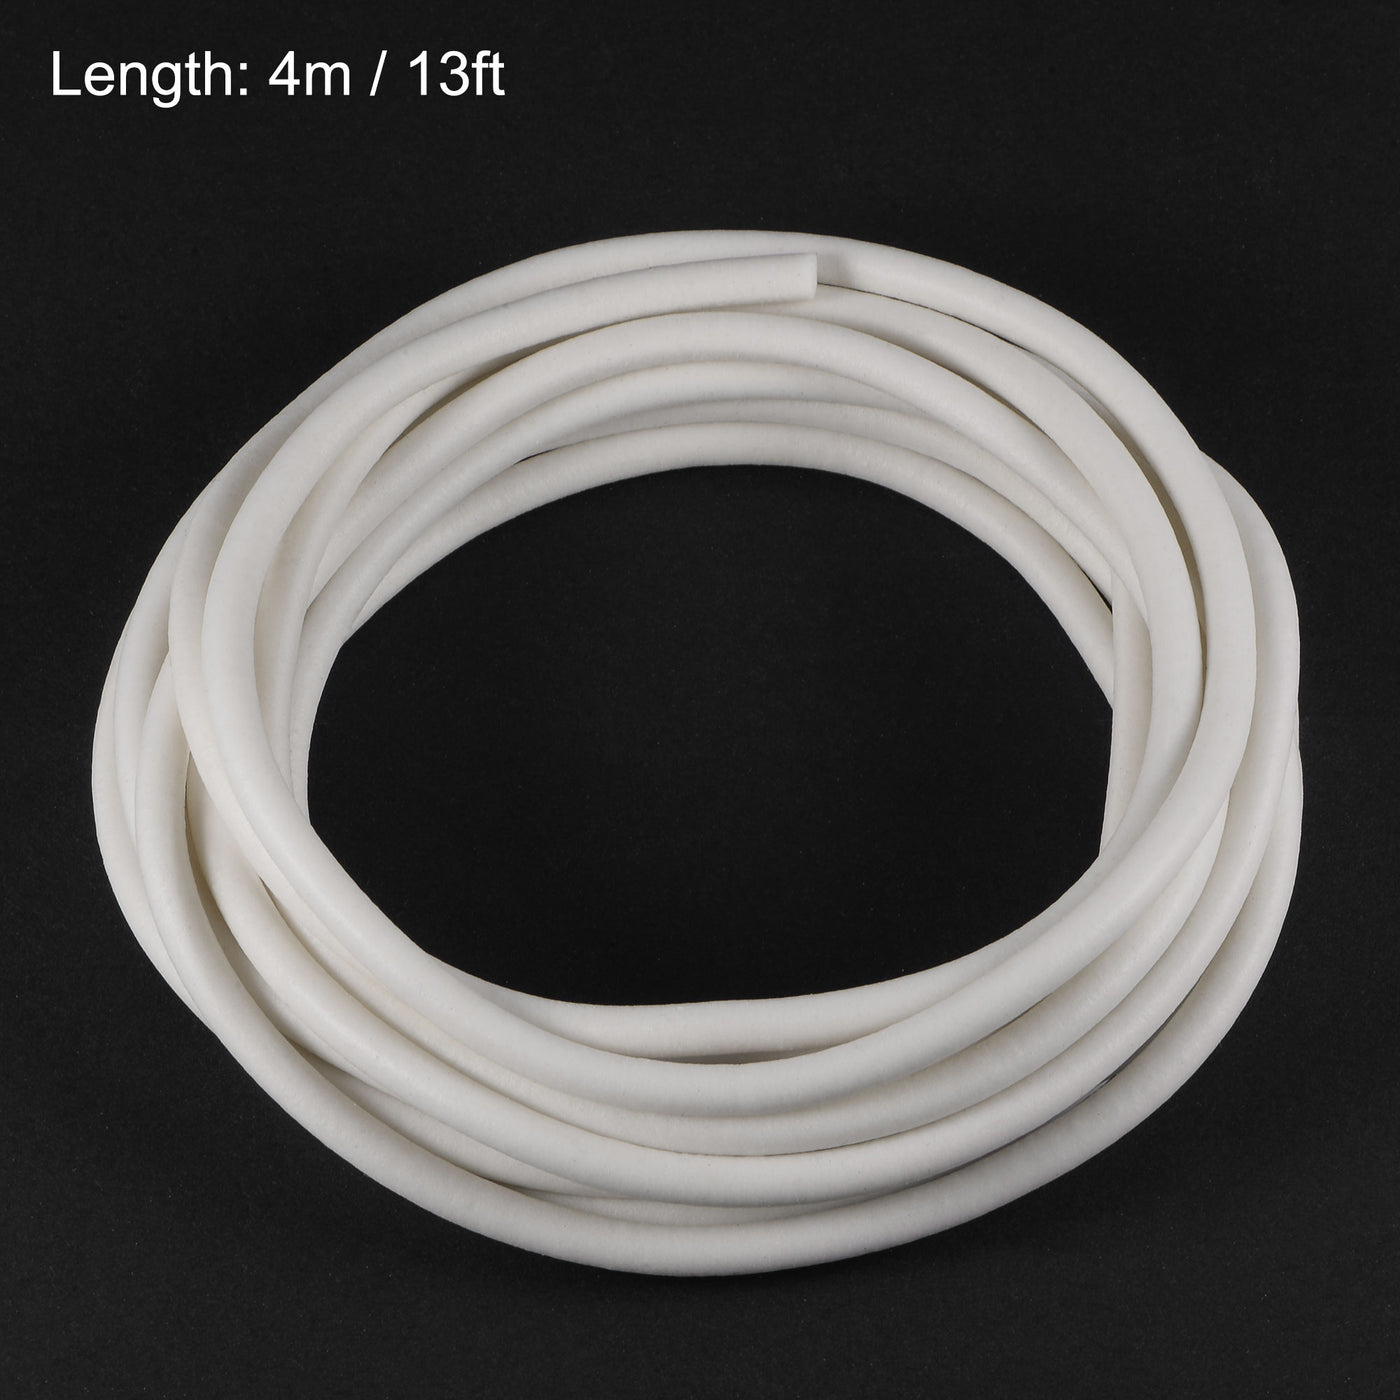 uxcell Uxcell 5mm Soft Silicone Bending Insert Tube for Rigid Tubing 13ft White